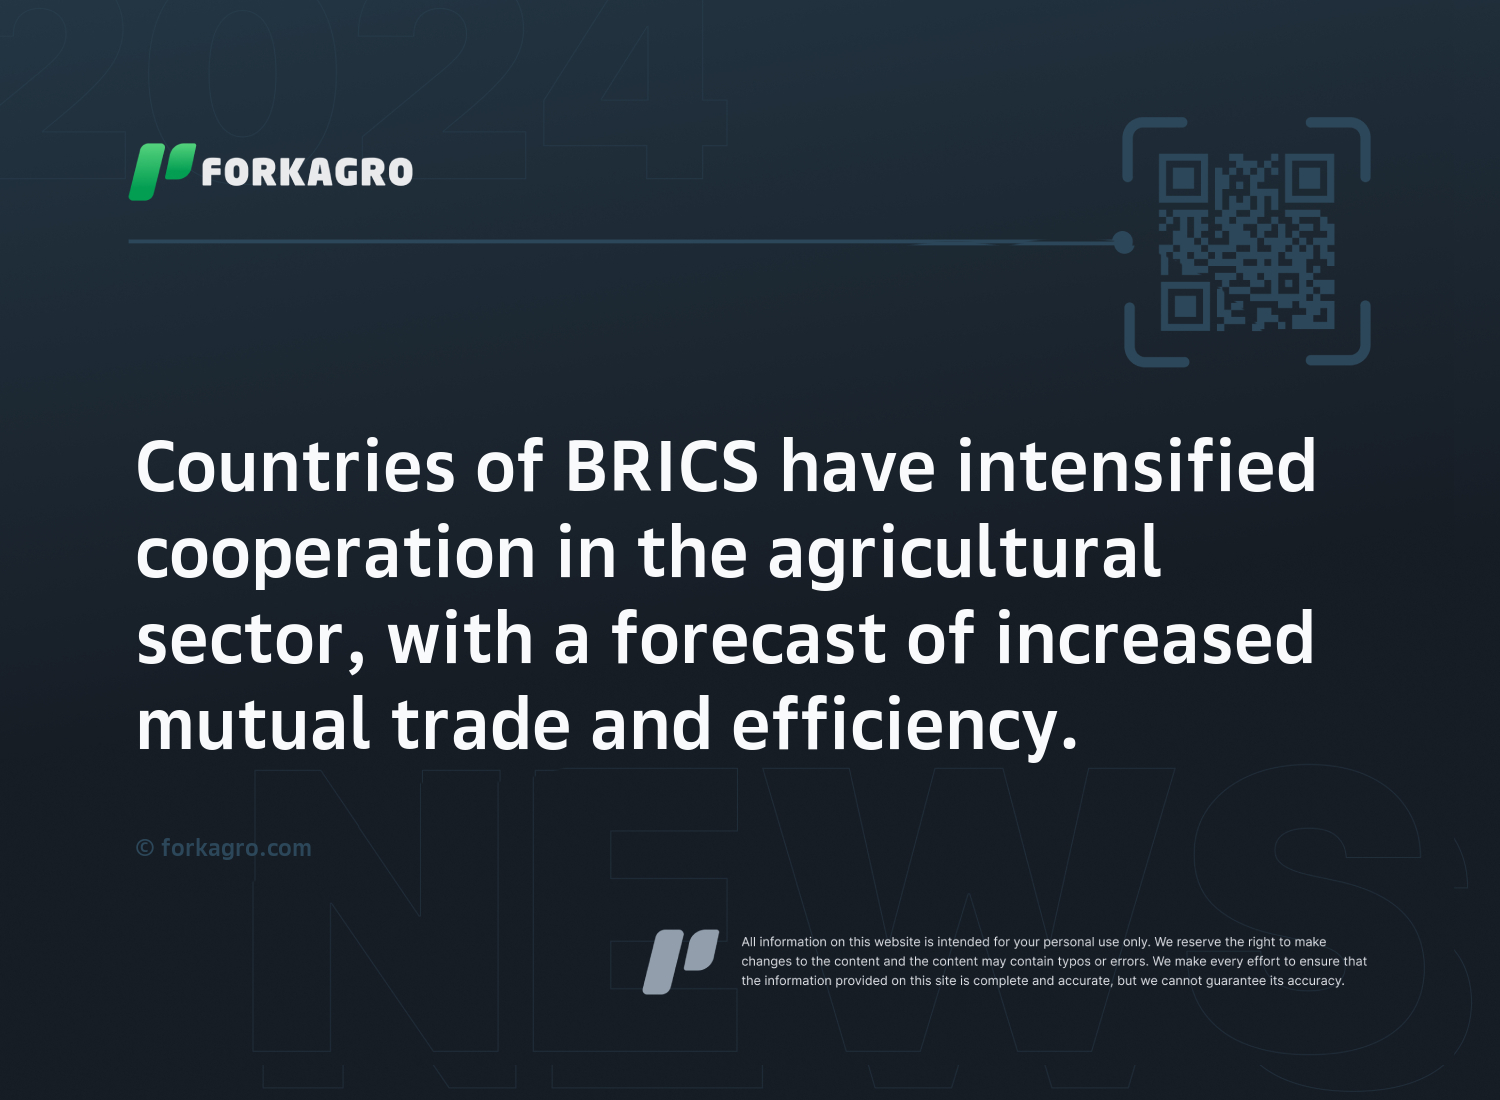 Countries of BRICS have intensified cooperation in the agricultural sector, with a forecast of increased mutual trade and efficiency.